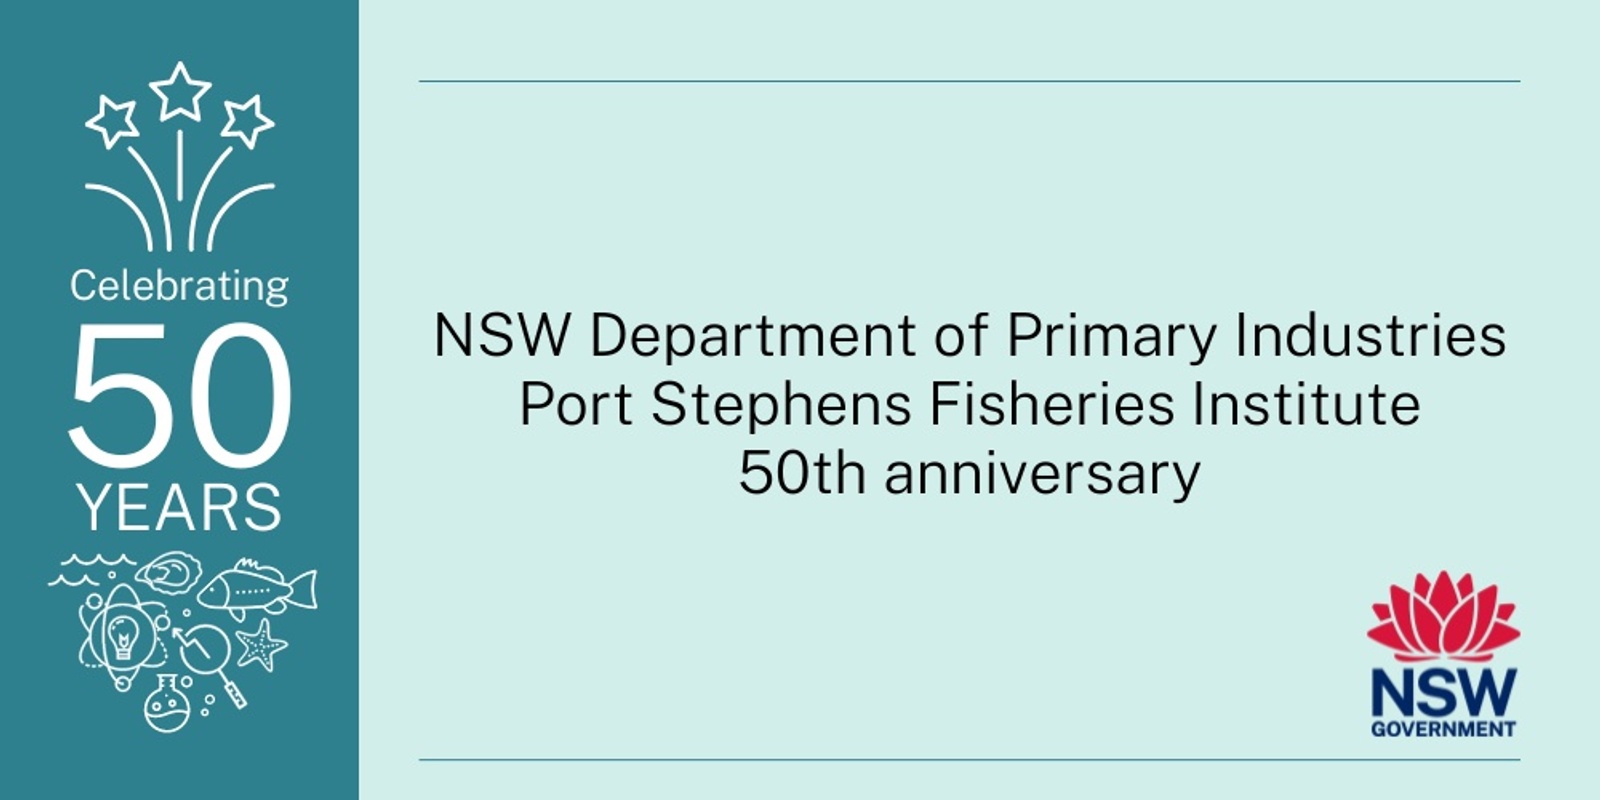 Banner image for Port Stephens Fisheries Institute 50th anniversary